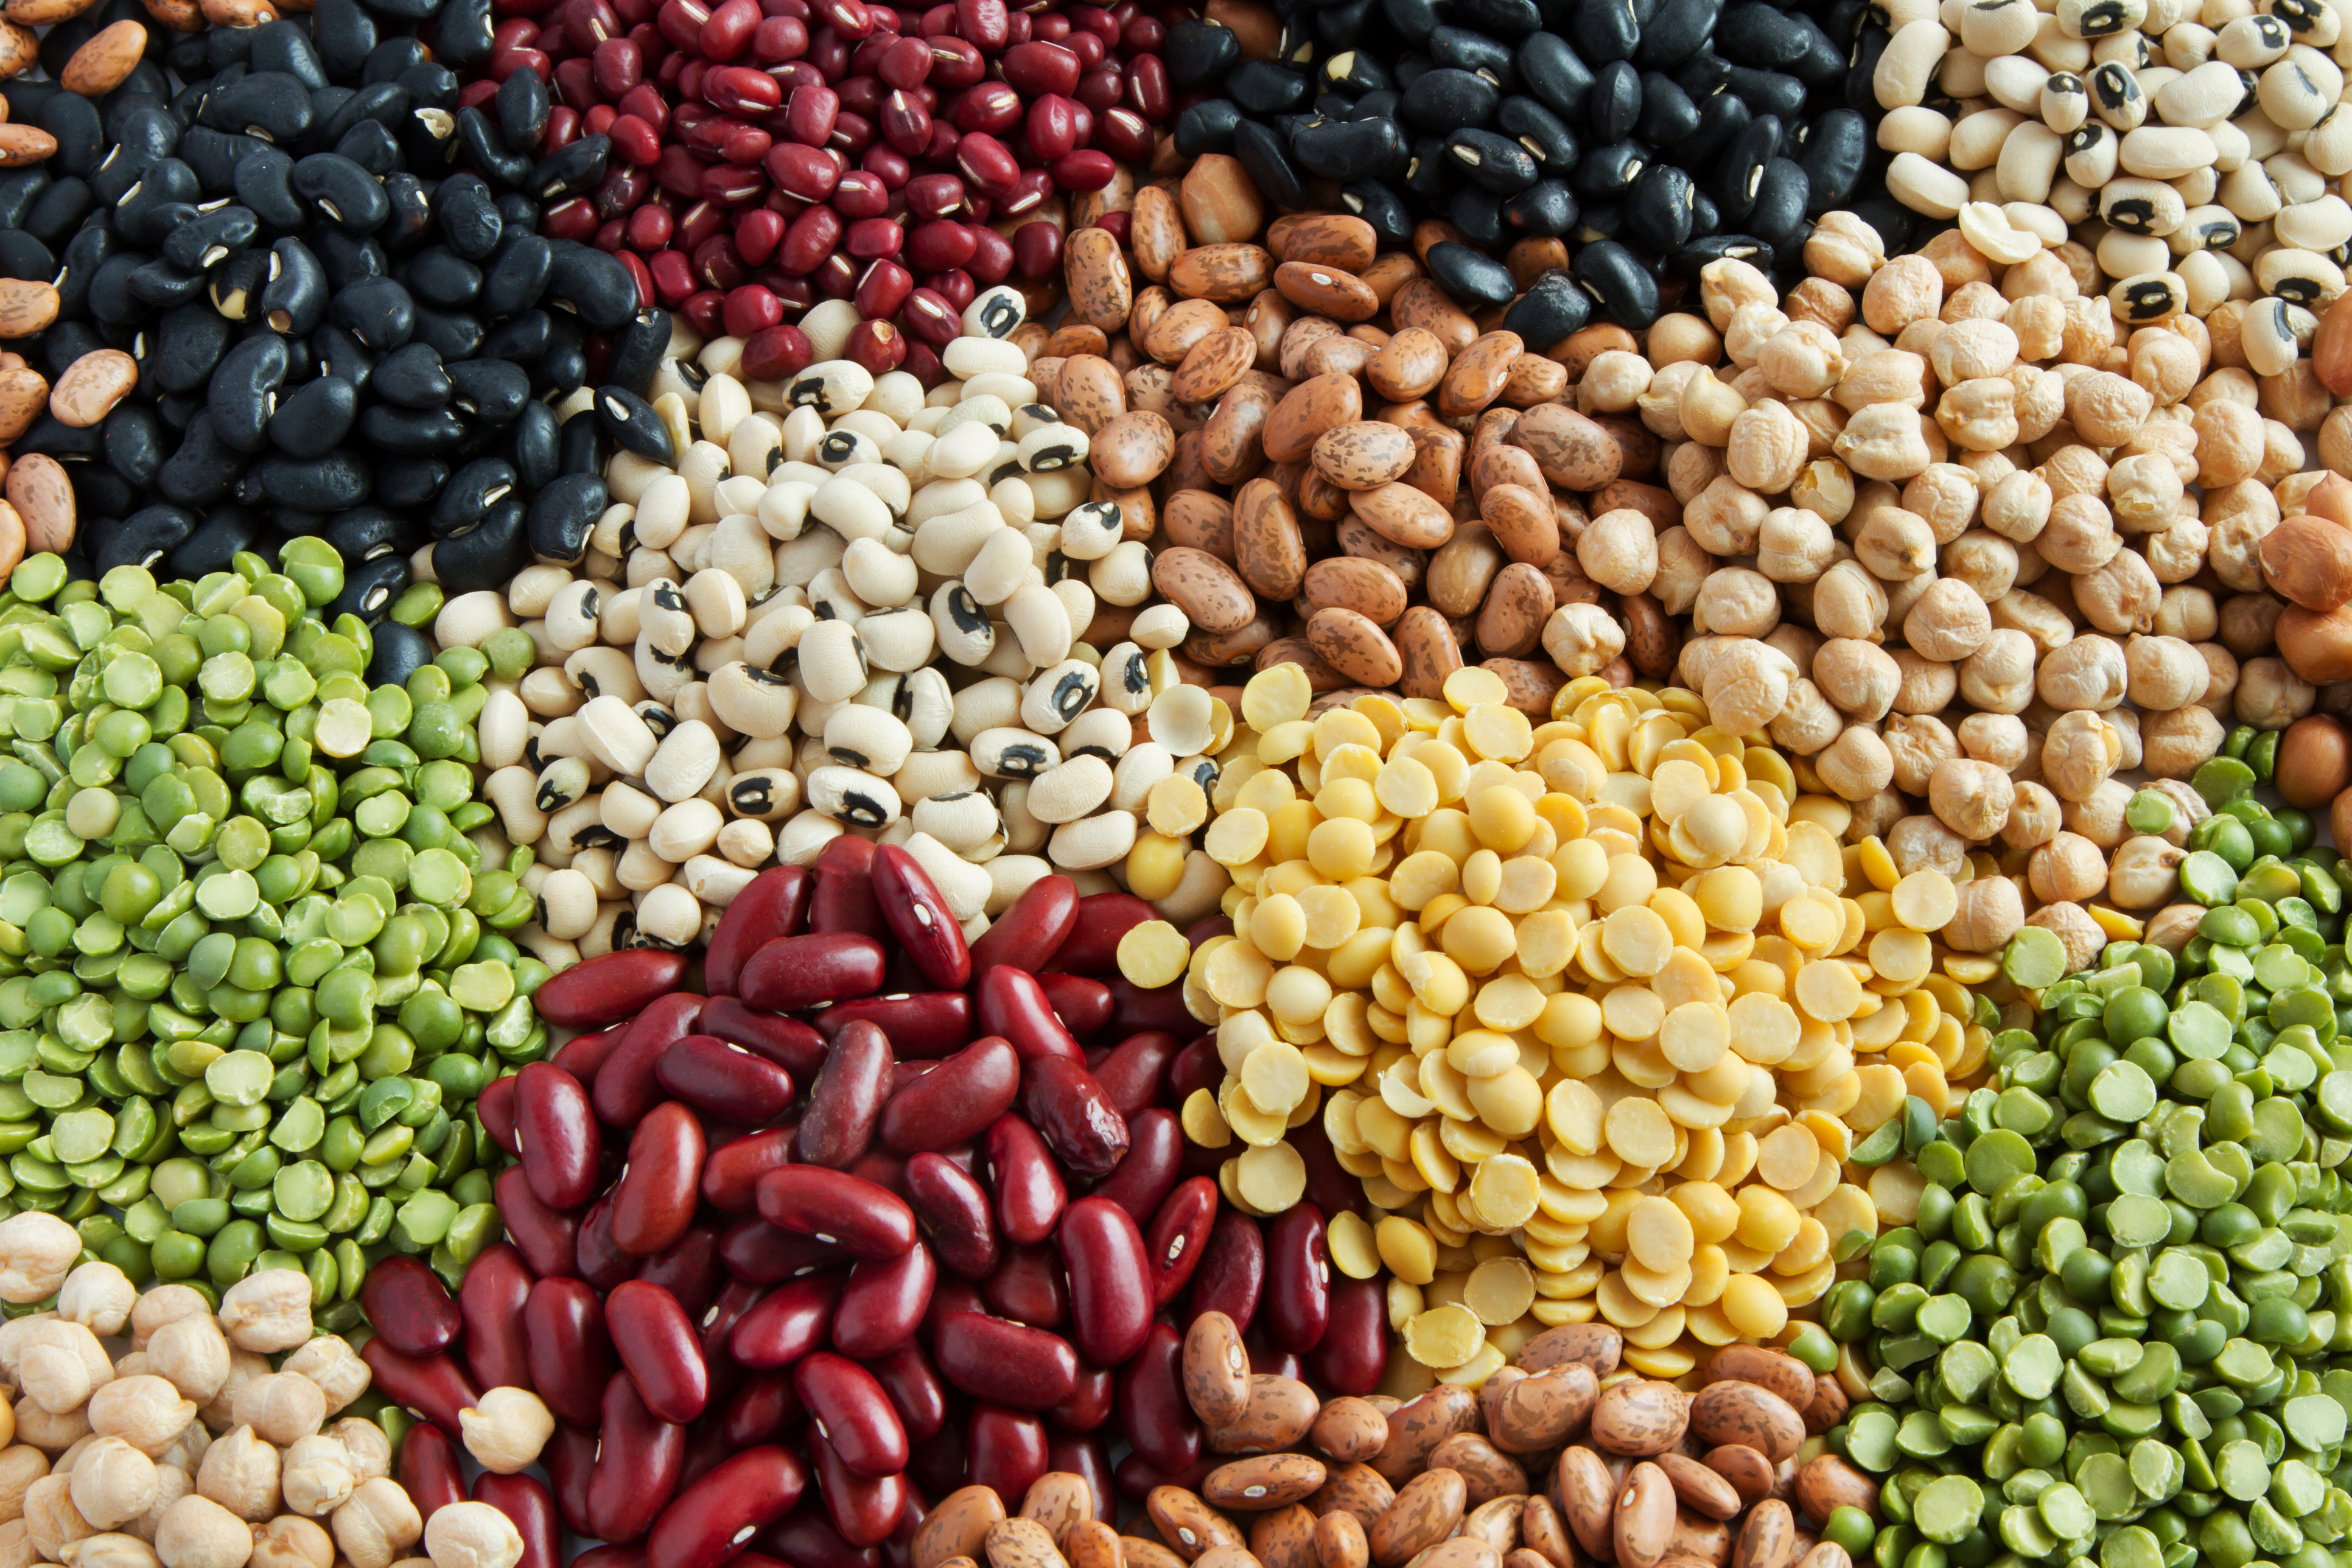 Grains and pulses